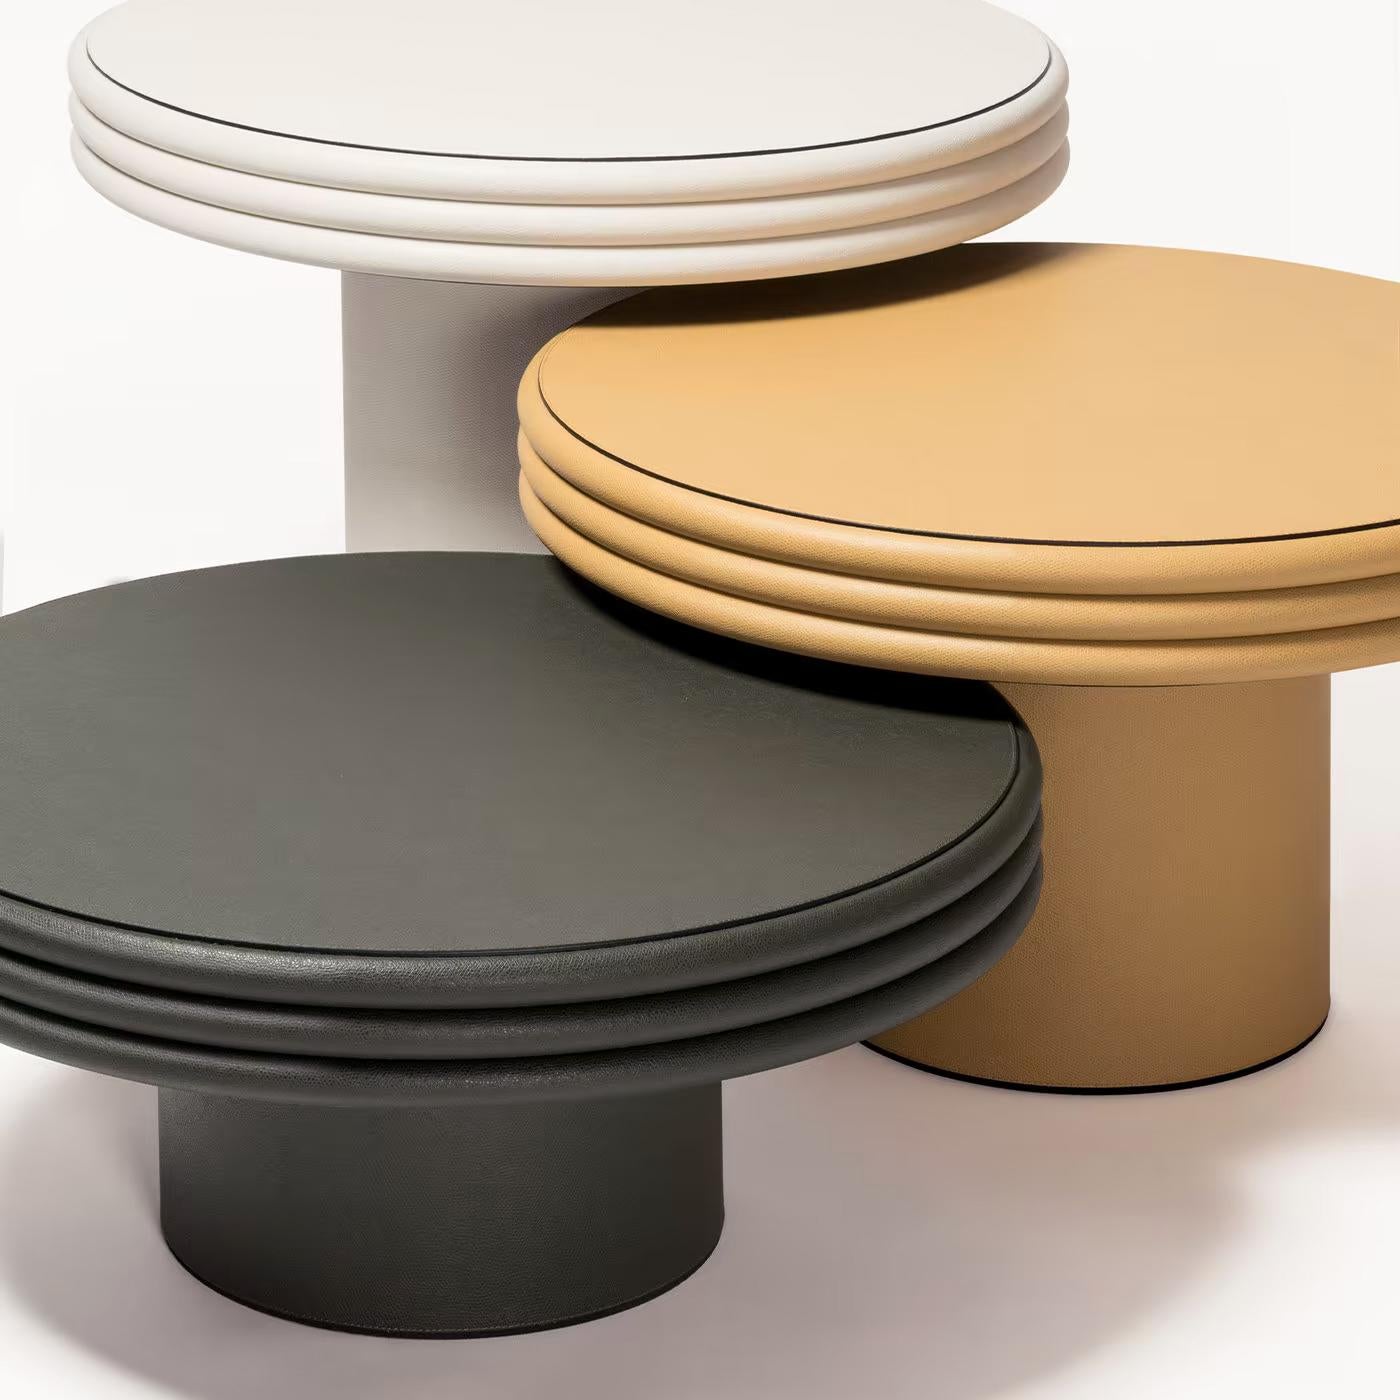 Coffee table Catane set of 3, each with solid wood structure,
covered with high quality italian genuine calfskin leather.
Black coffee table, diameter 60,5cm x height 26cm, price: 3750,00€.
Mustard coffee table, diameter 60,5cm x height 36cm,